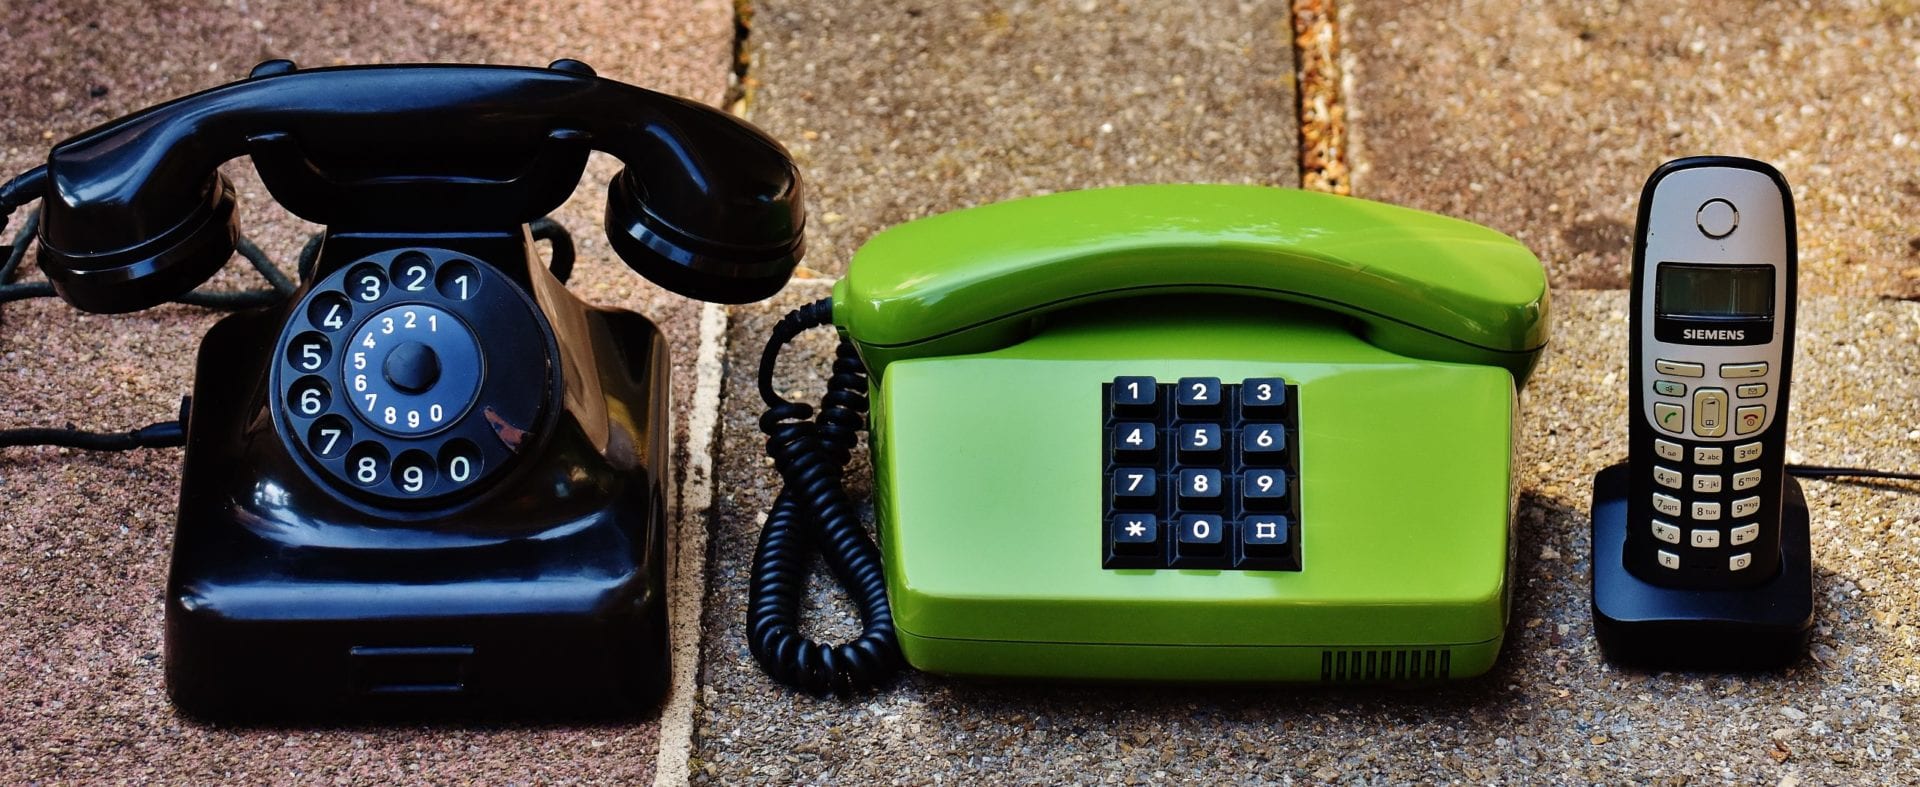 VoIP: Communication Technology for the Modern Business